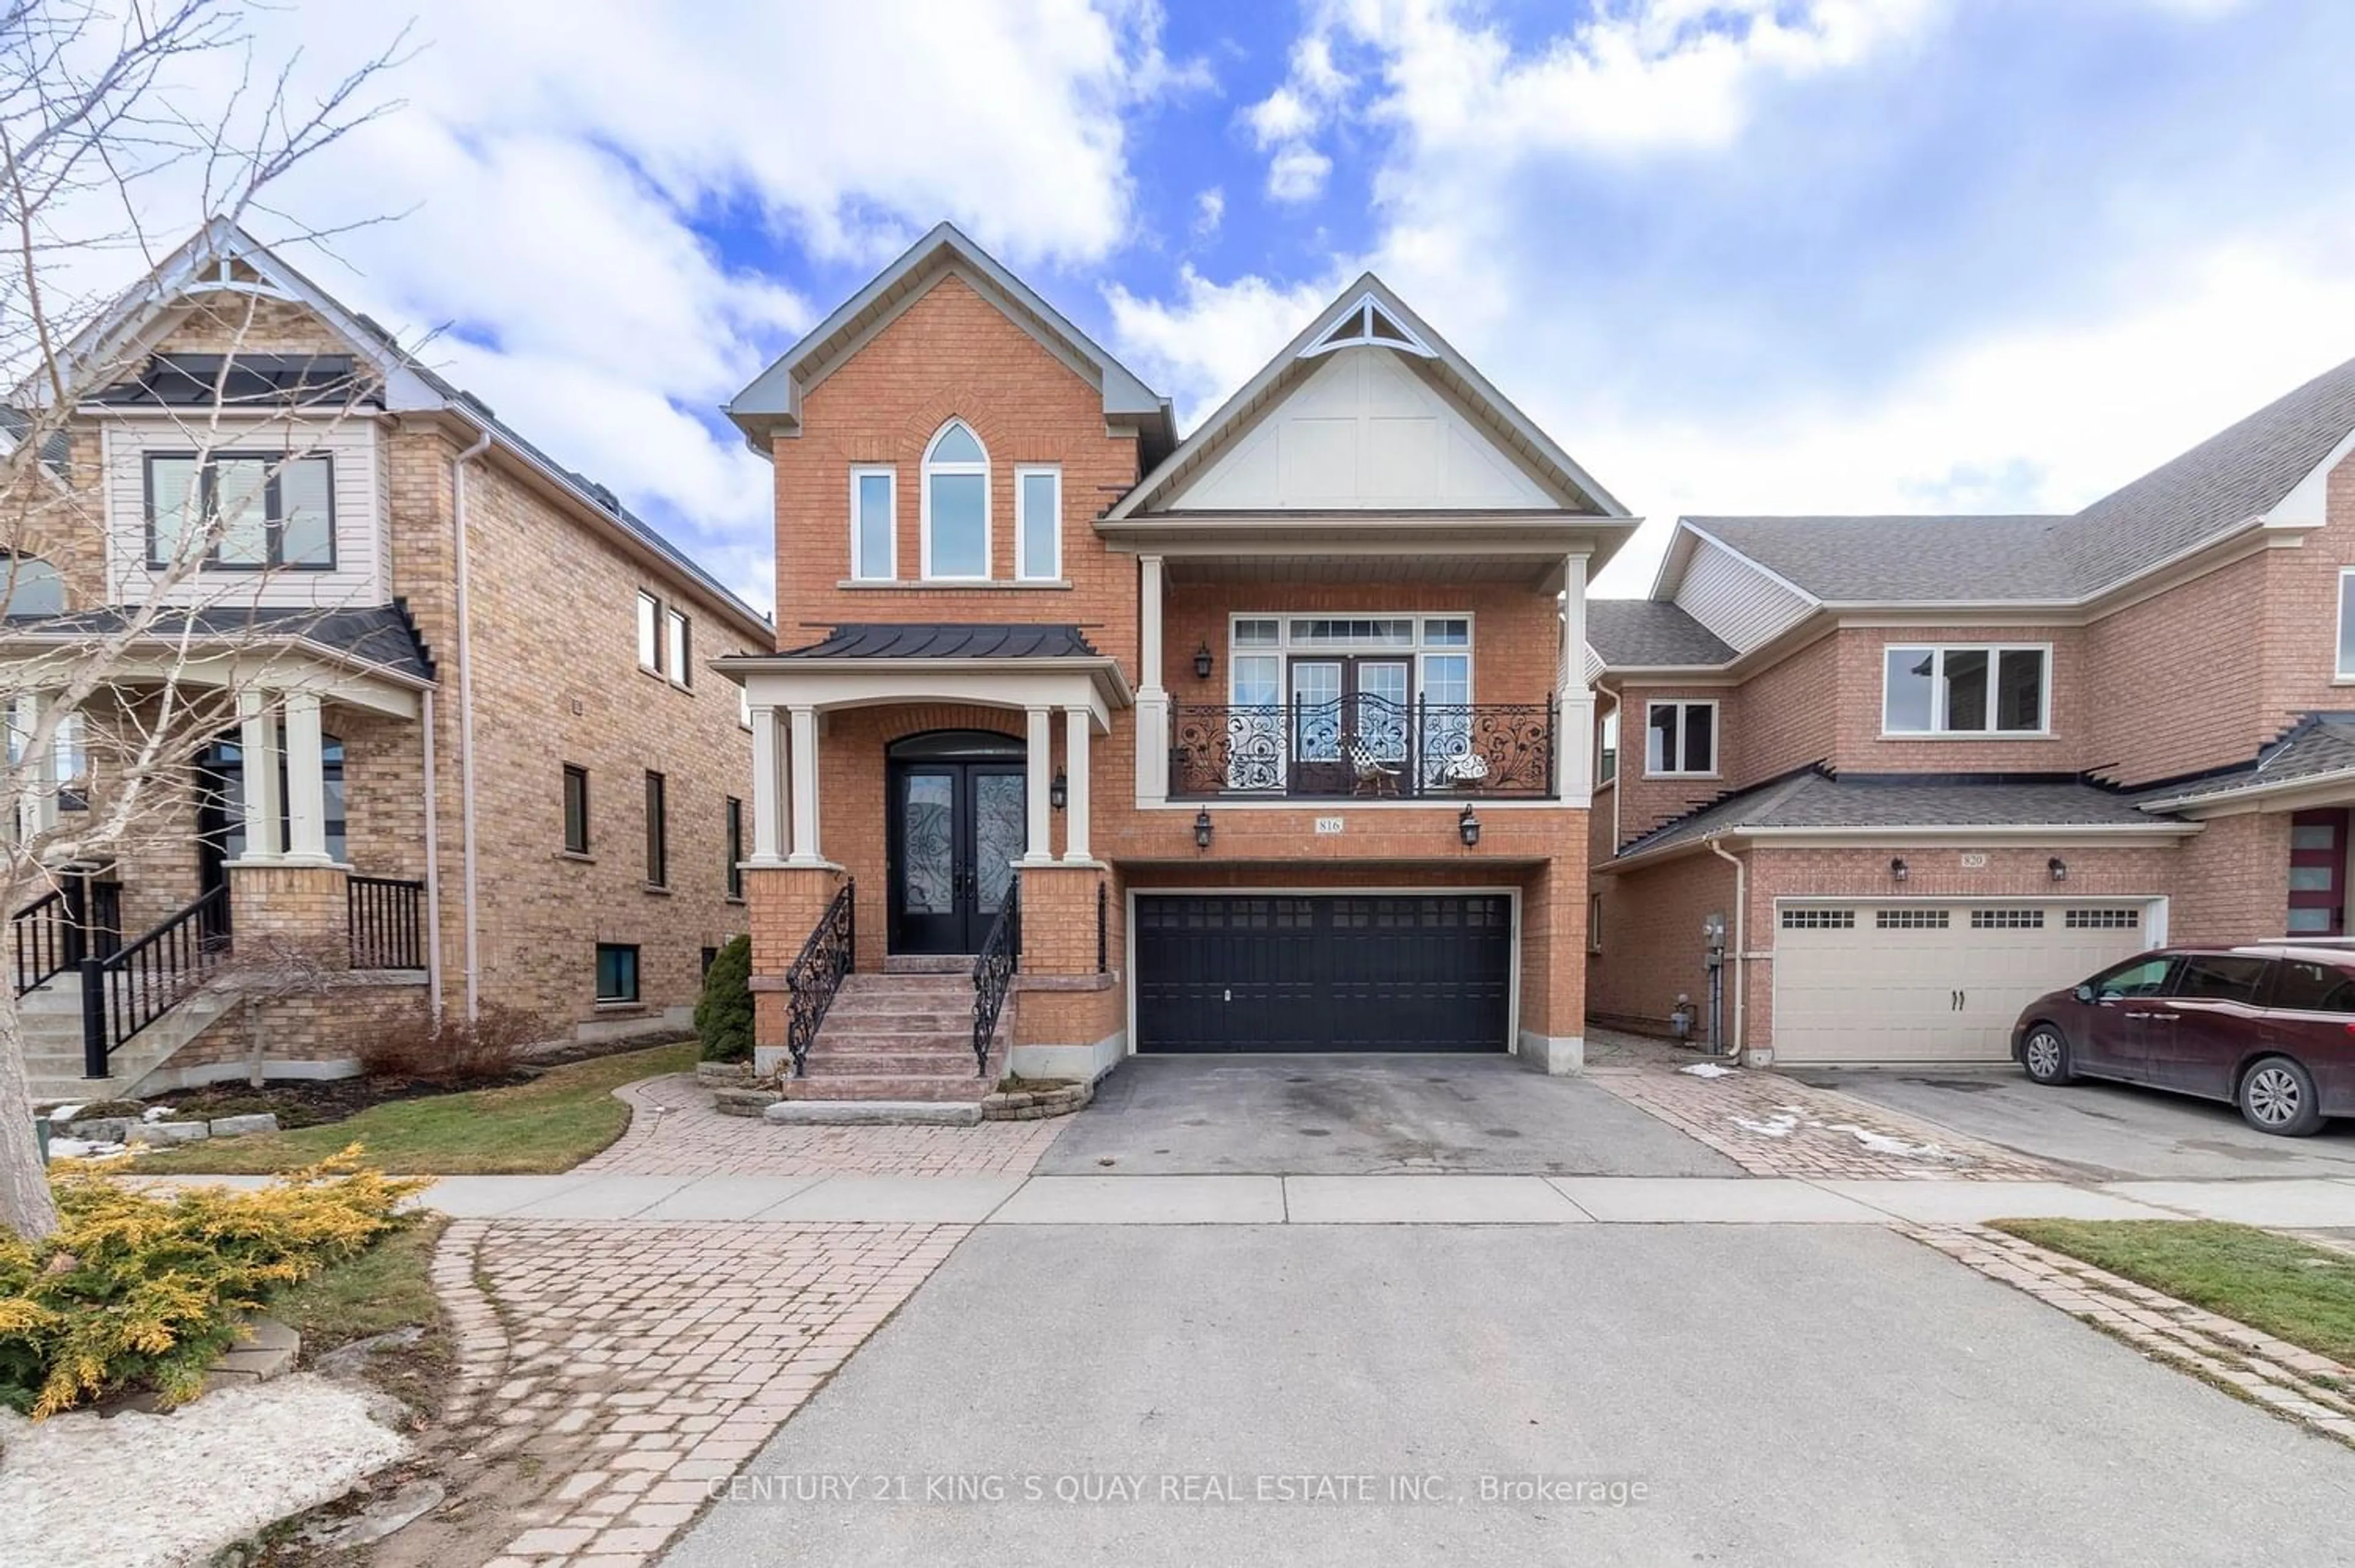 Home with brick exterior material for 816 Millard St, Whitchurch-Stouffville Ontario L4A 0B6